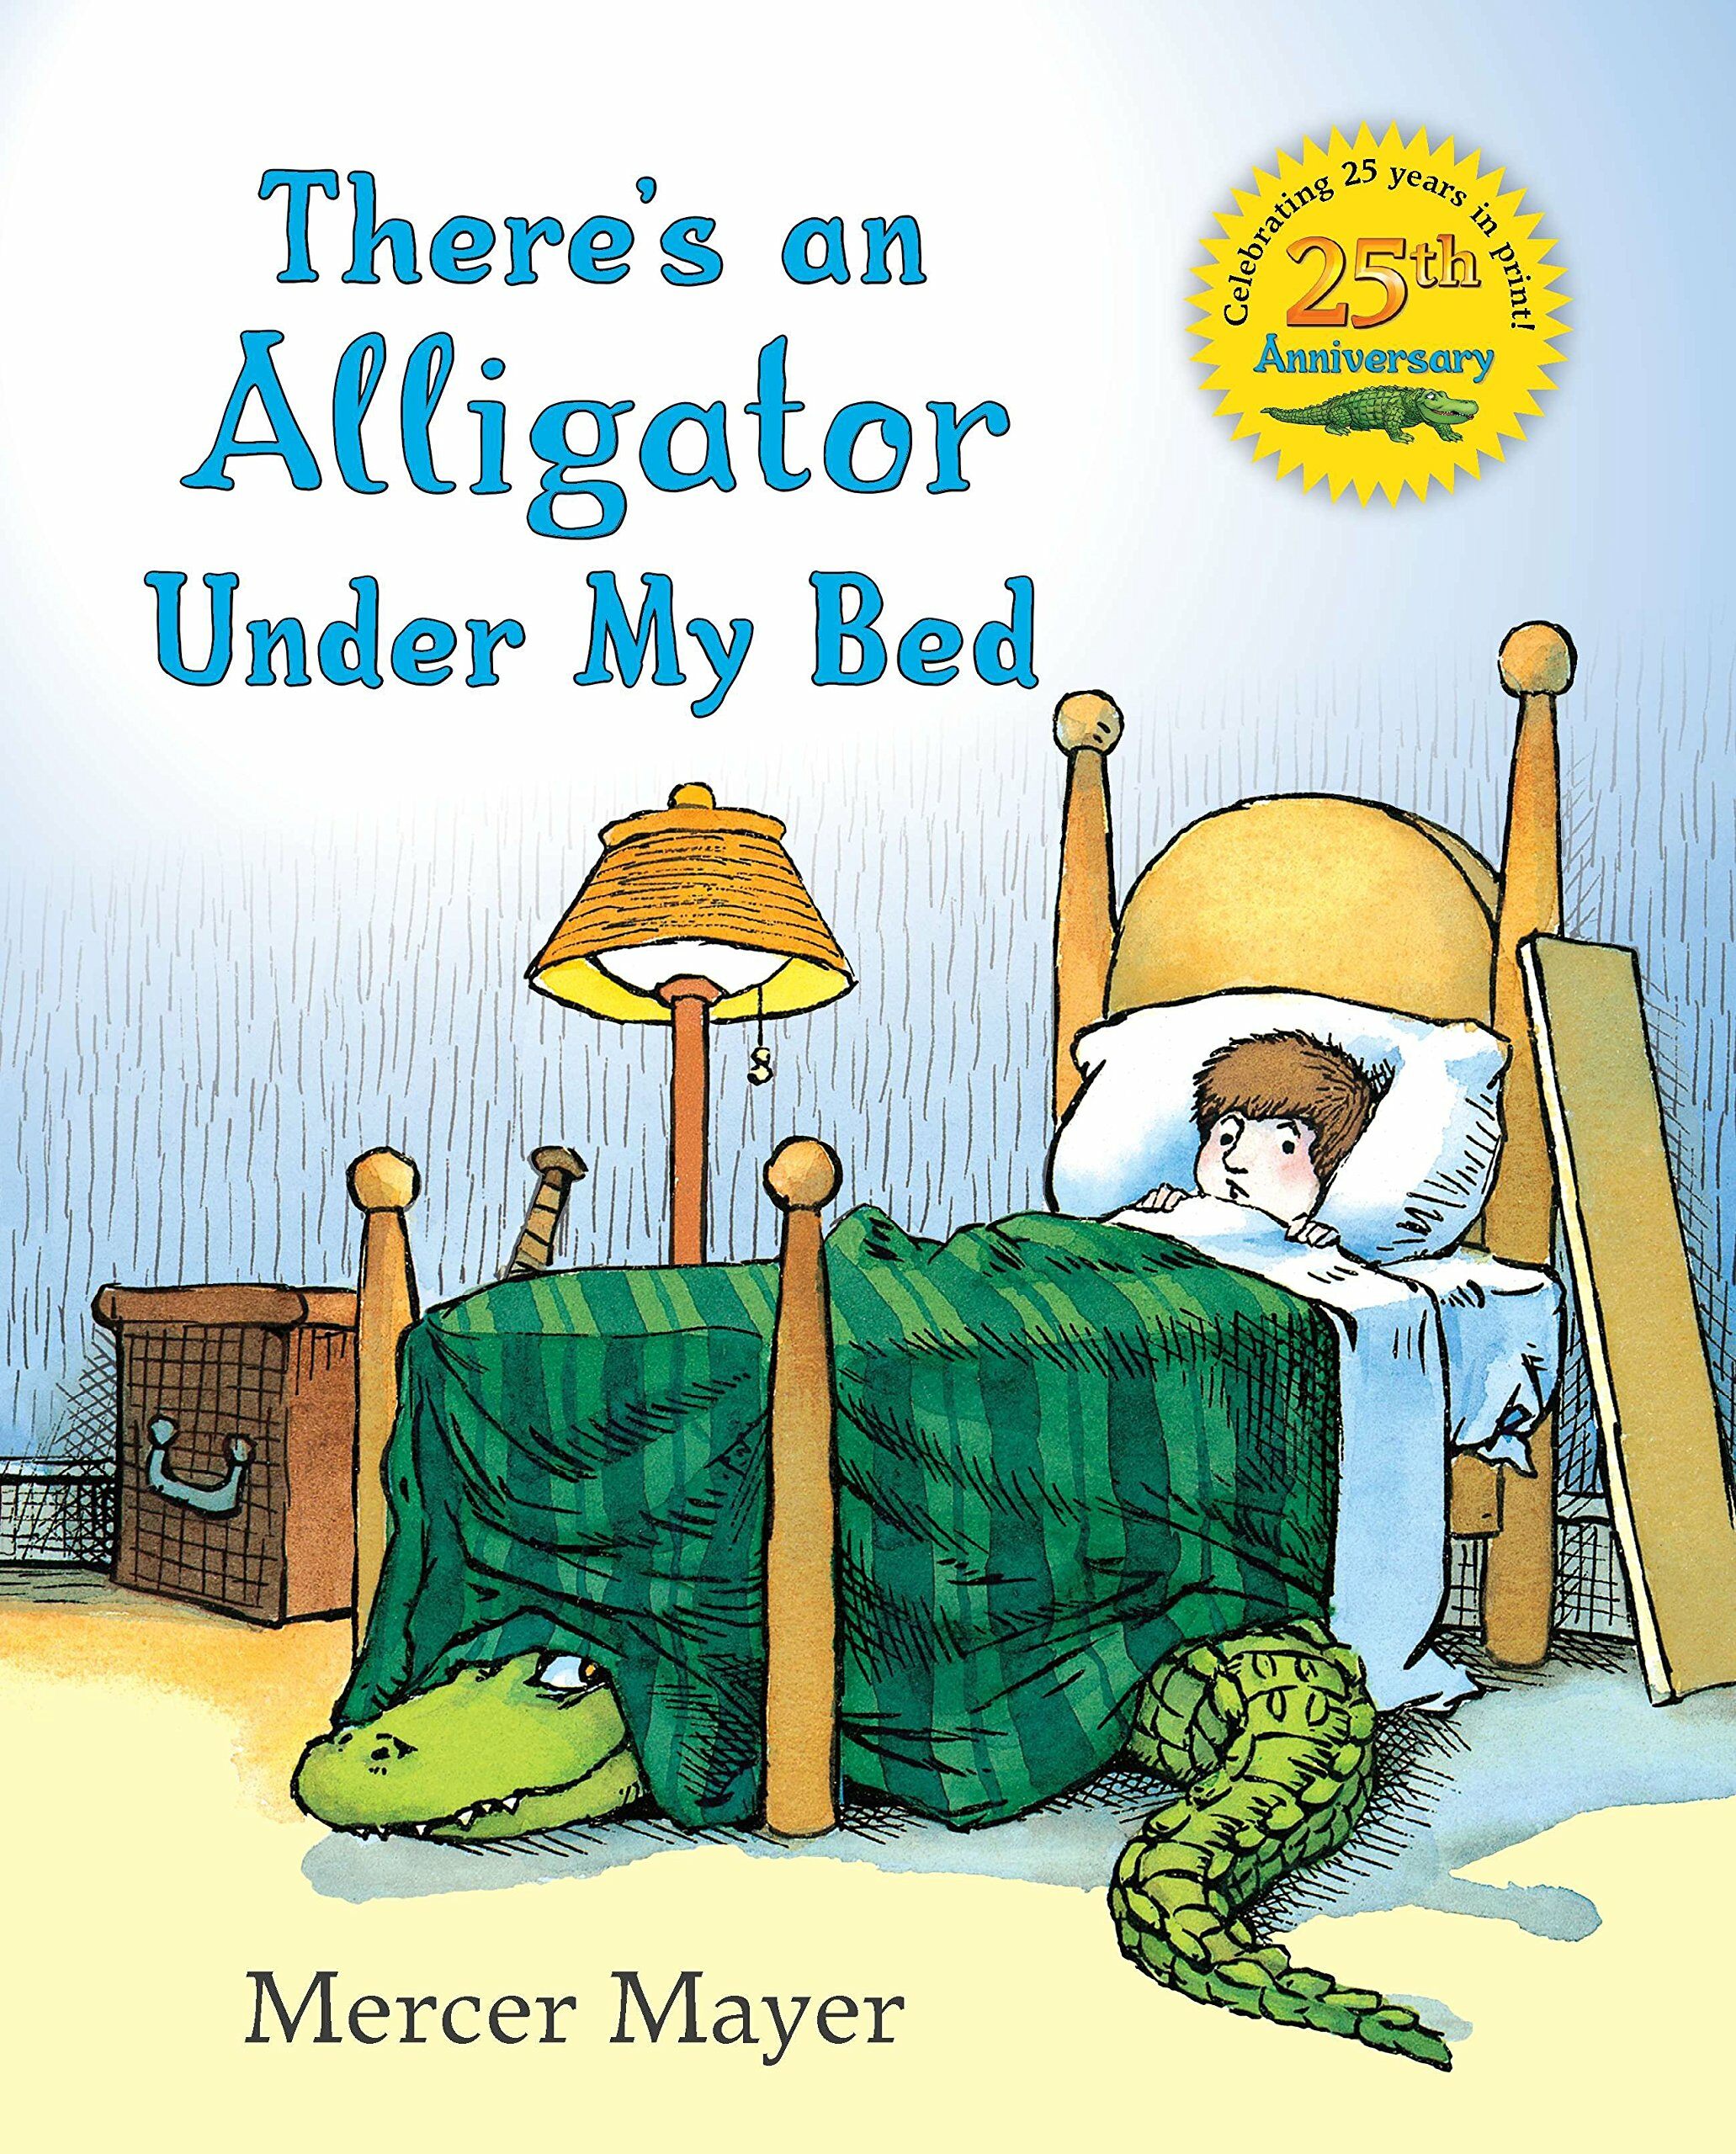 Theres an Alligator Under My Bed (Hardcover)